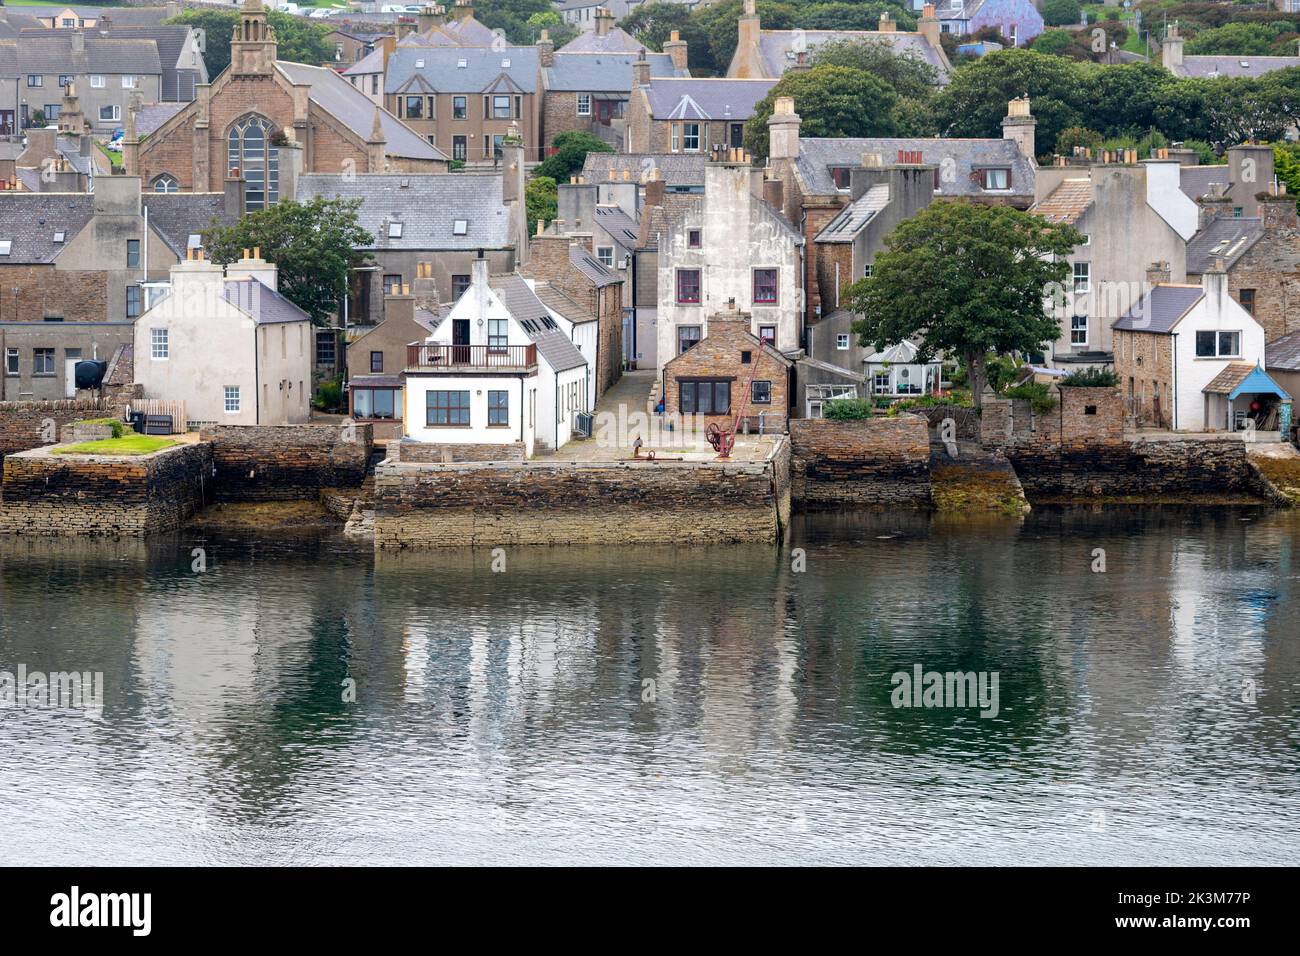 View of Stromness Harbour from the NorthLink Ferries ,  Orkney, Scotland, UK Stock Photo